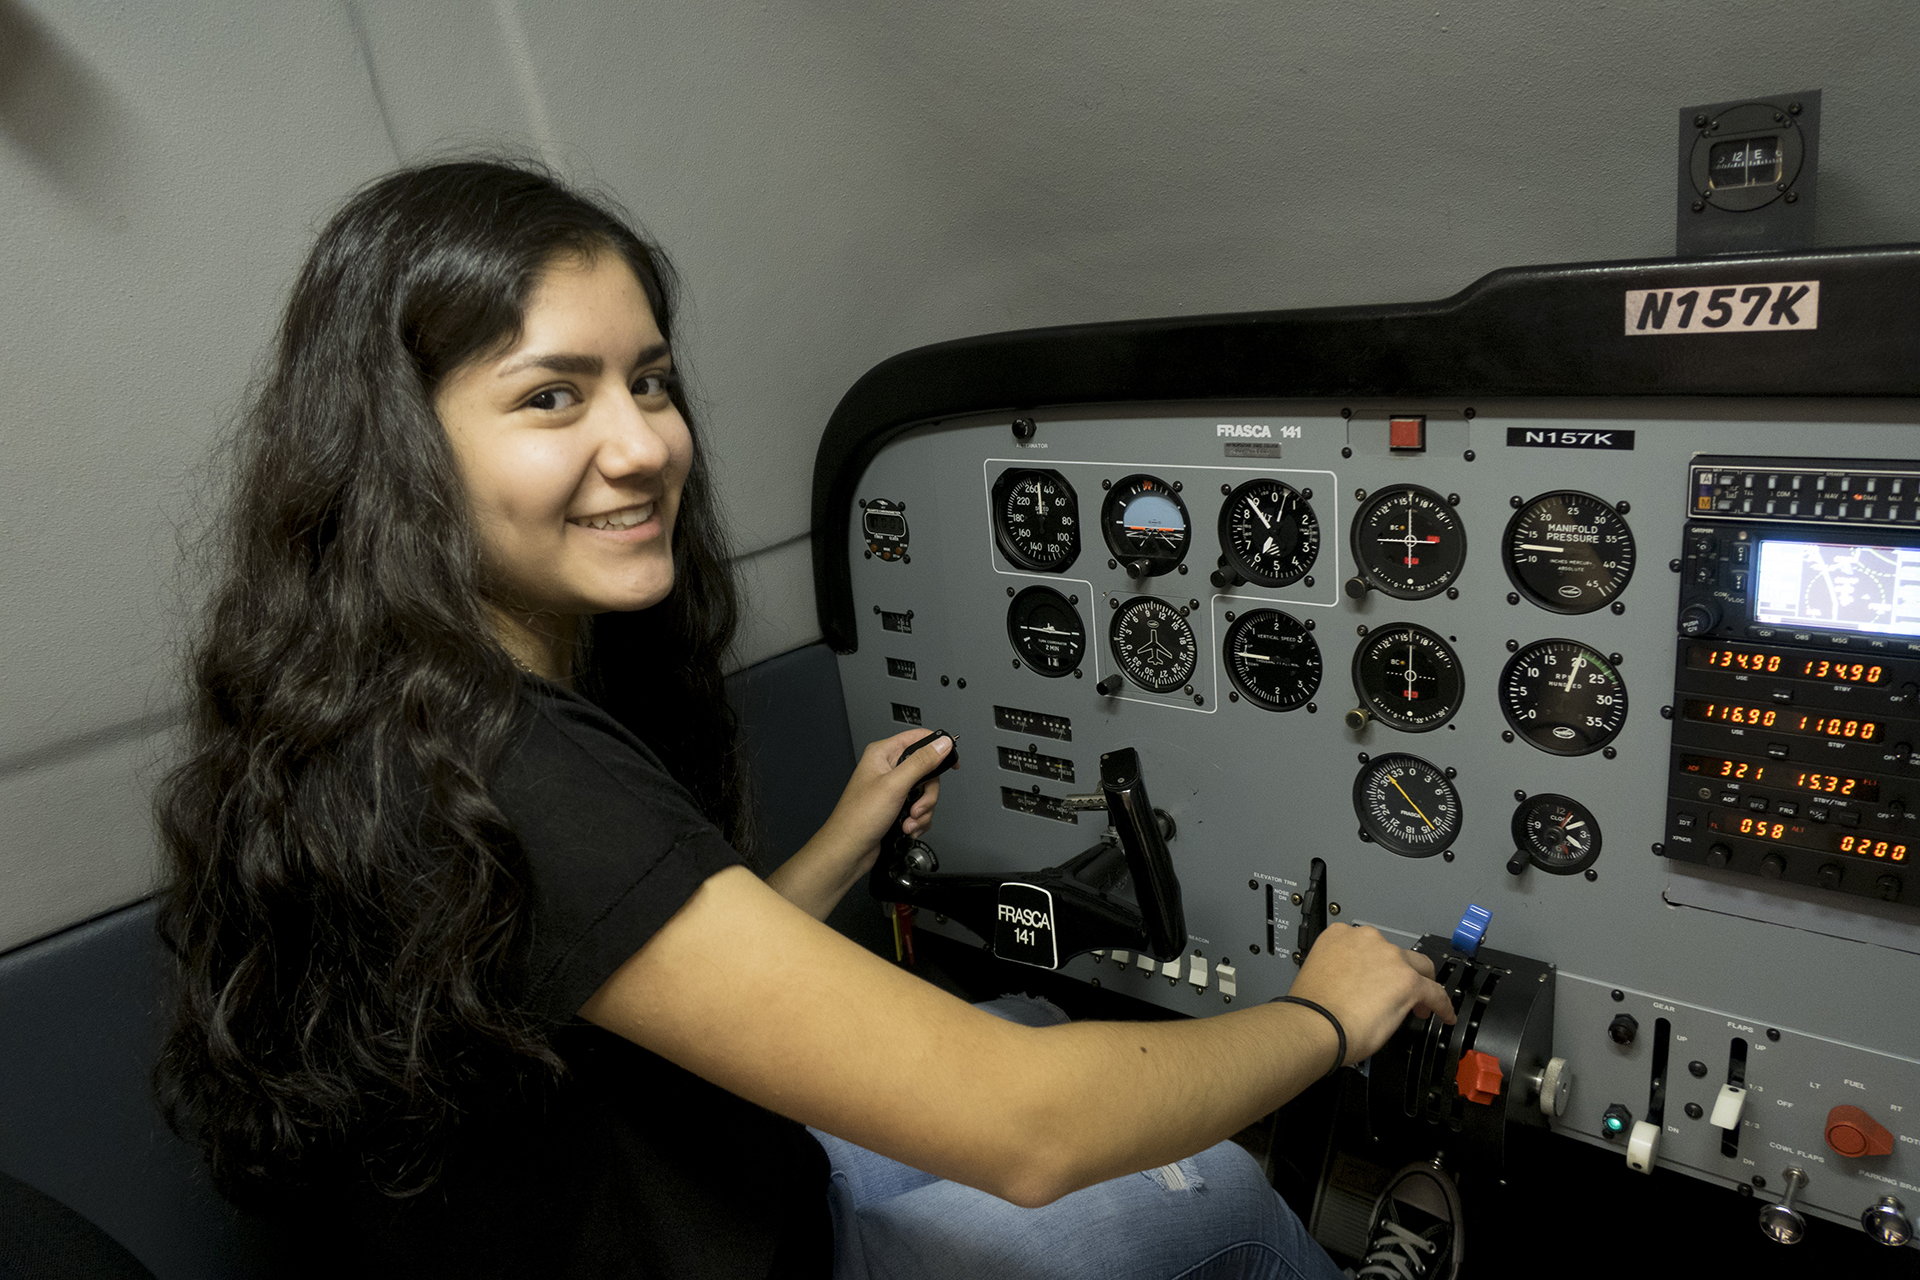 Student at the controls of a plane simulator